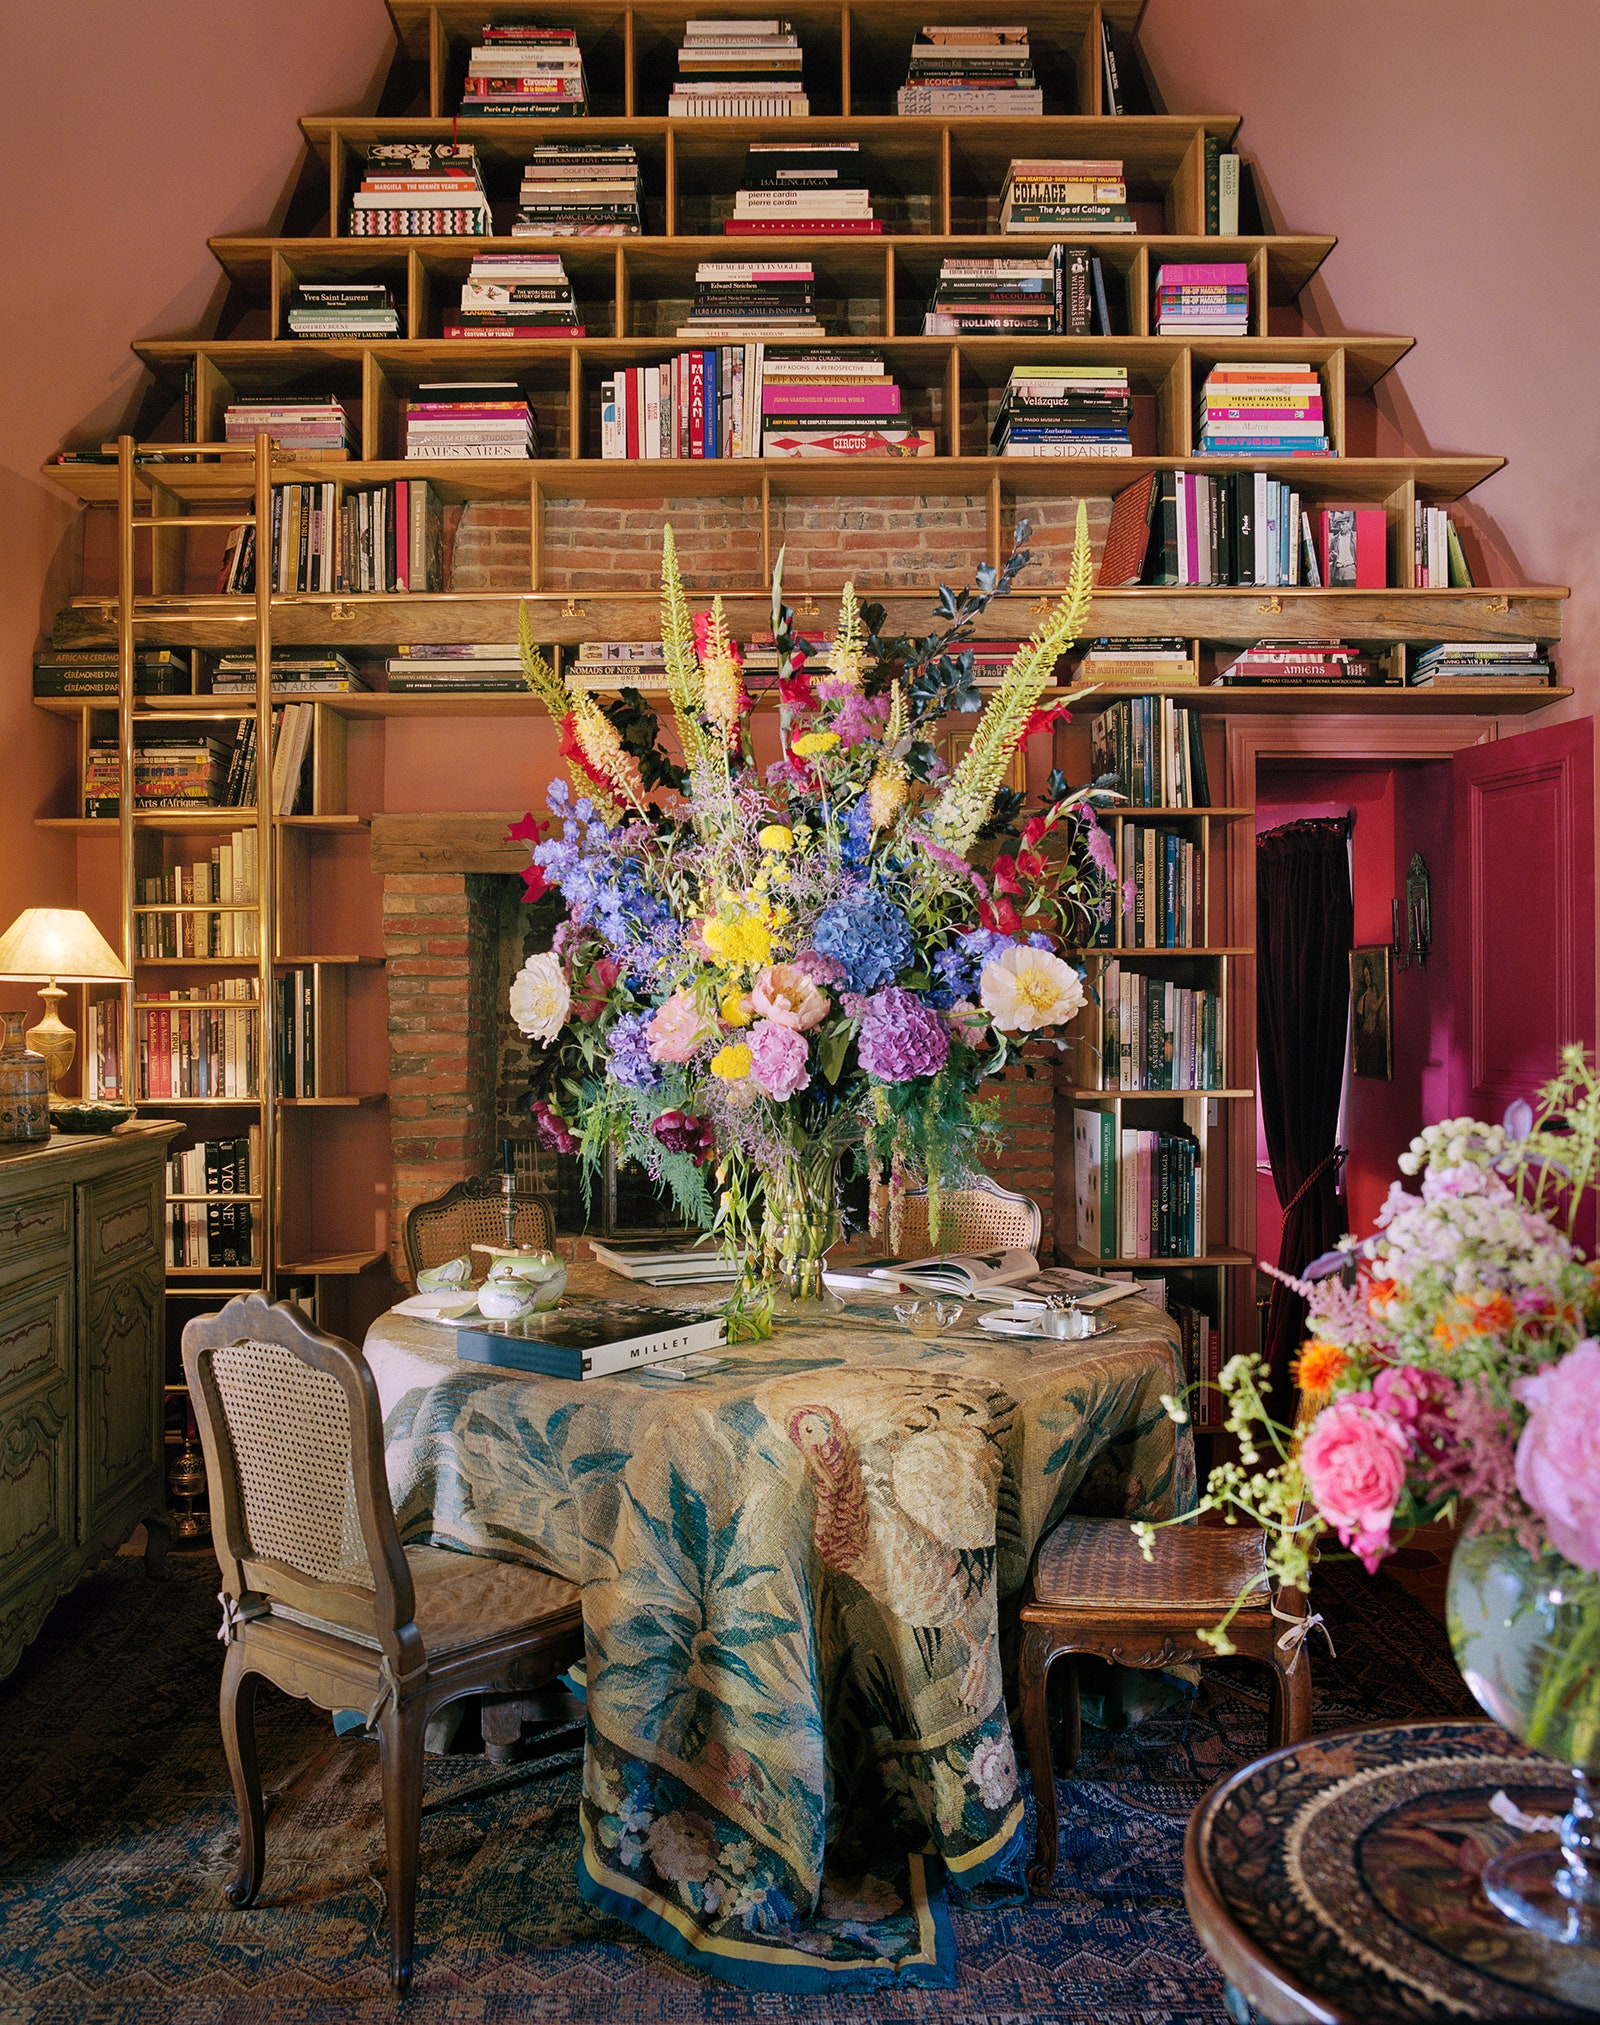 Décor Inspiration: John Galliano’s Country Home in Gerberoy, Northern France